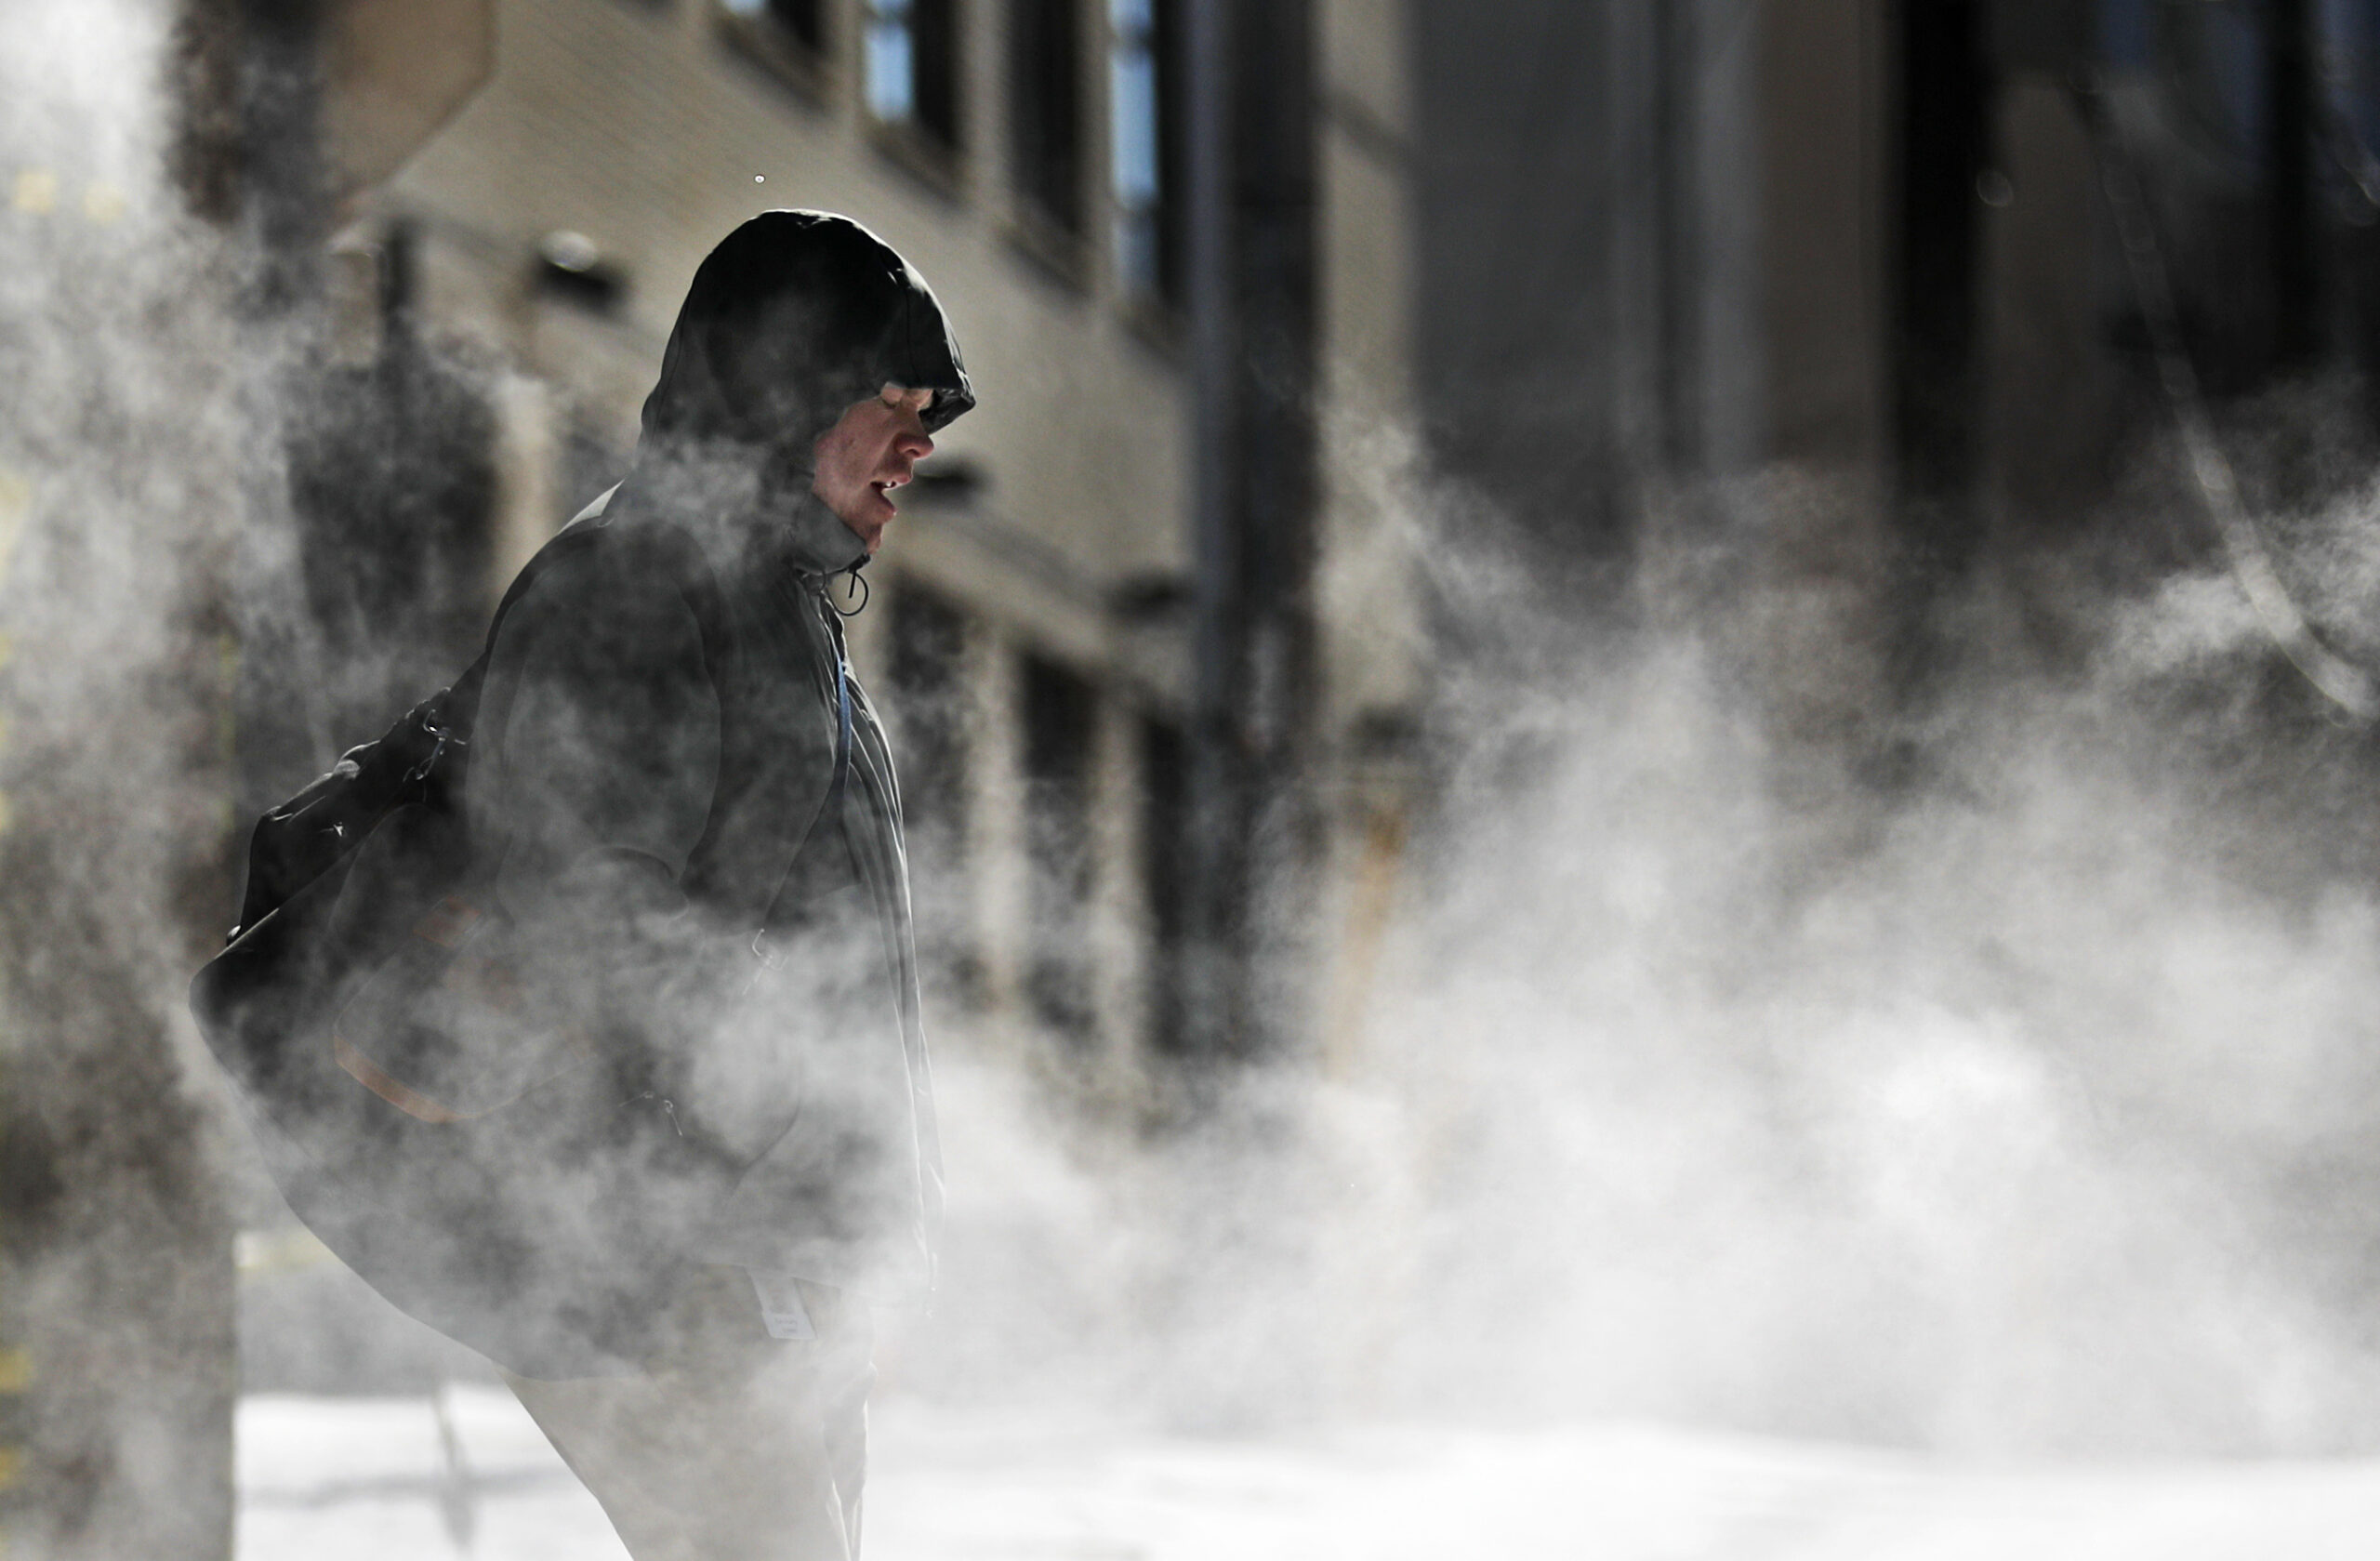 A man walks through steam venting from a building in the cold, winter weather